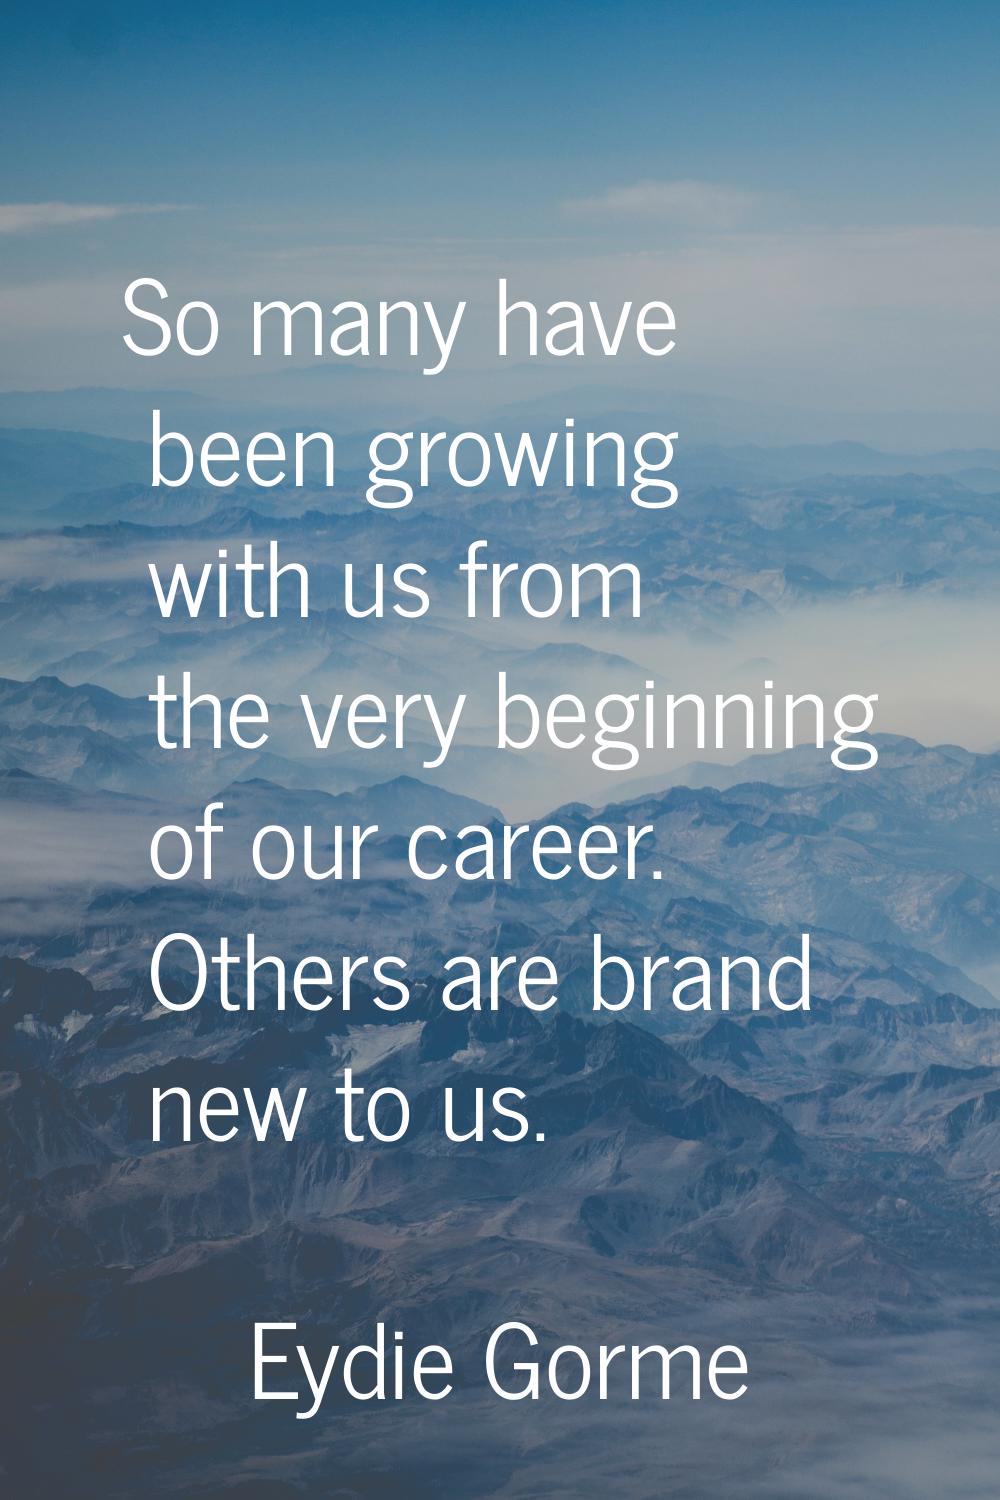 So many have been growing with us from the very beginning of our career. Others are brand new to us